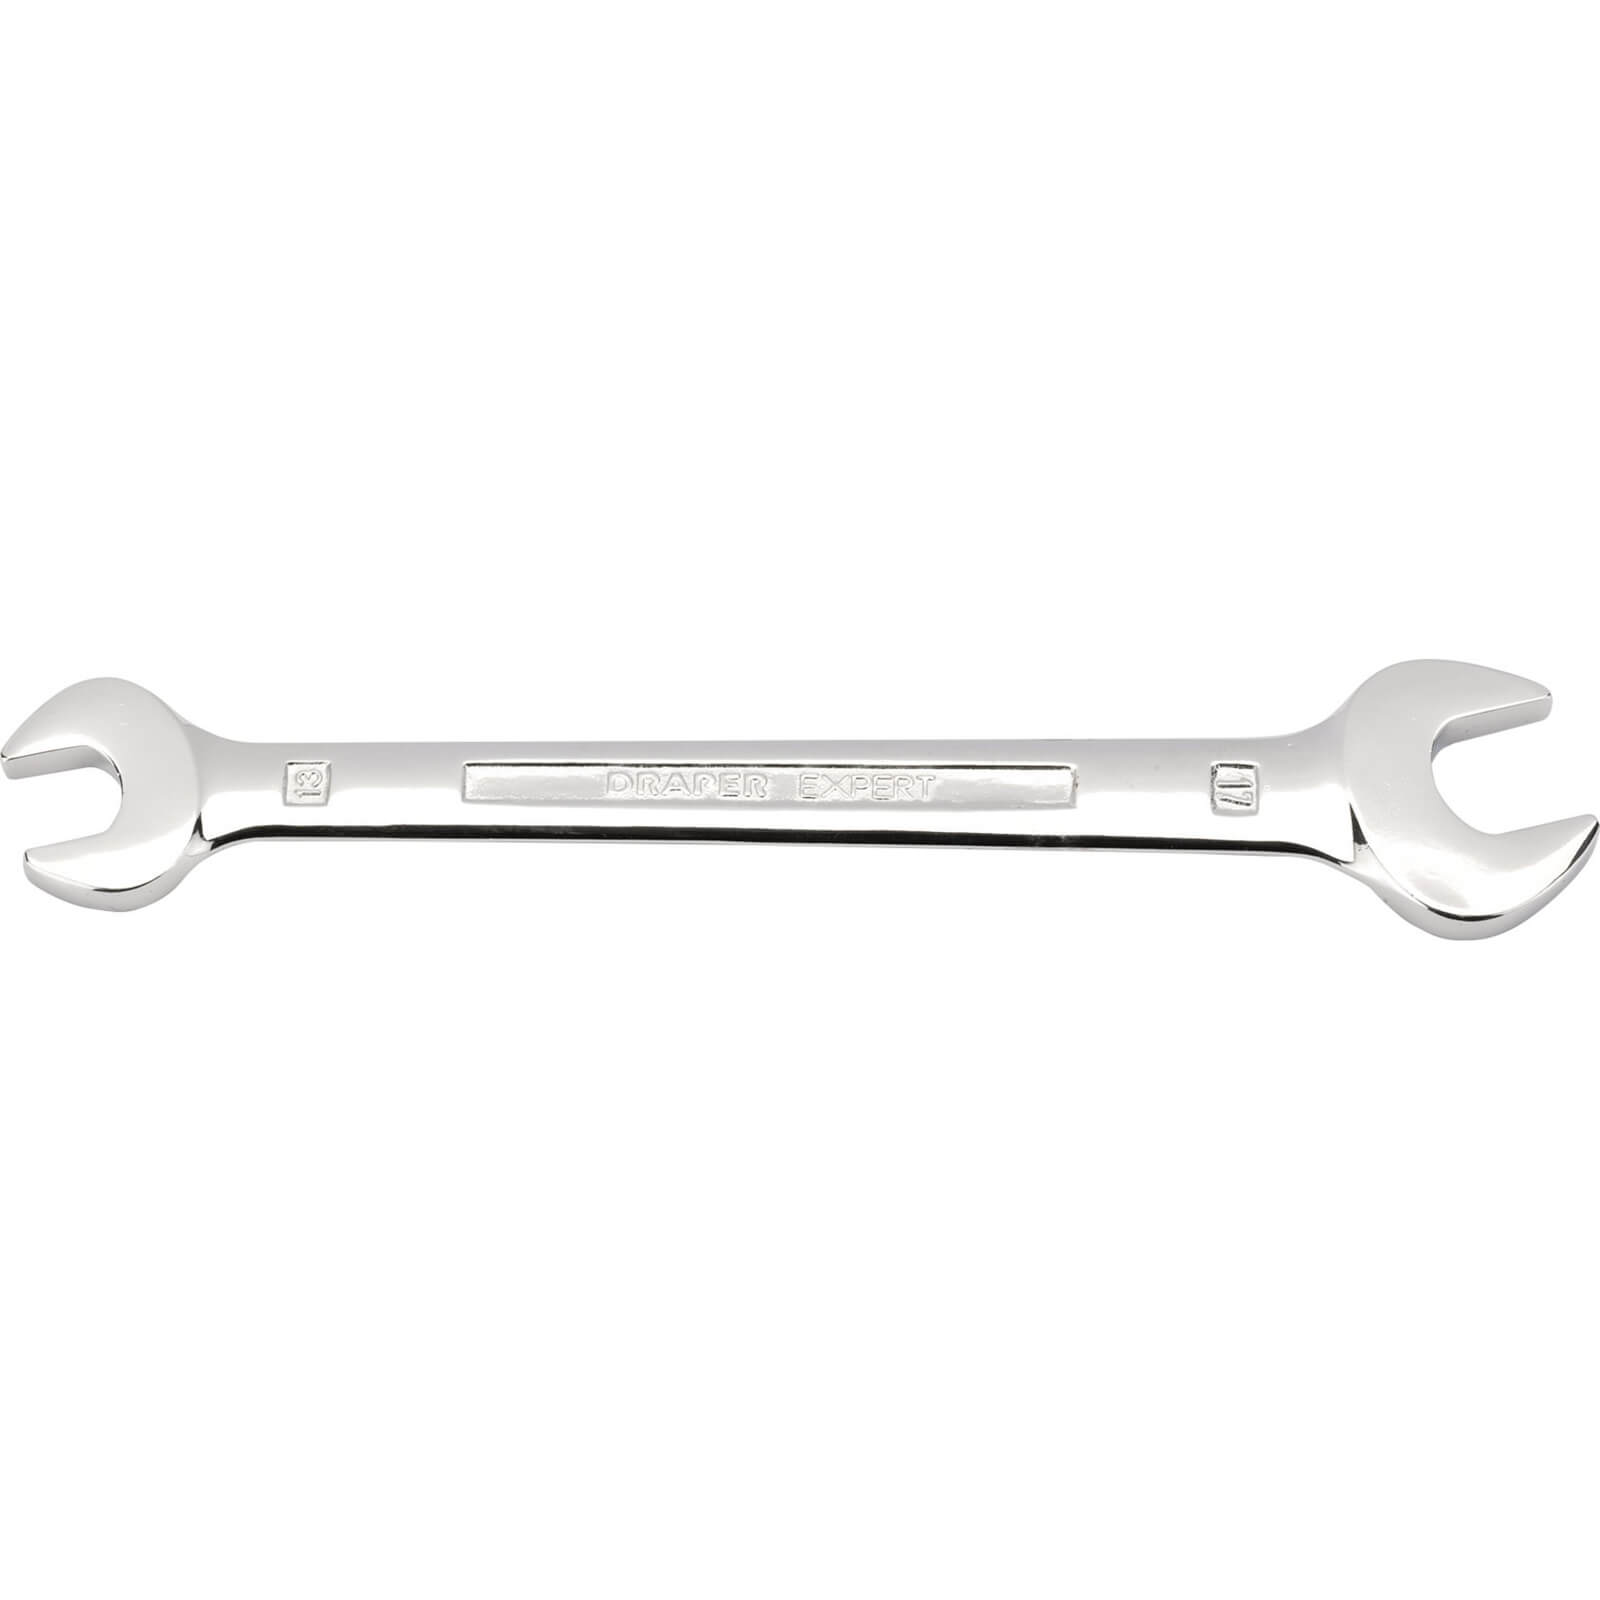 Image of Draper Expert Double Open Ended Spanner Metric 13mm x 17mm